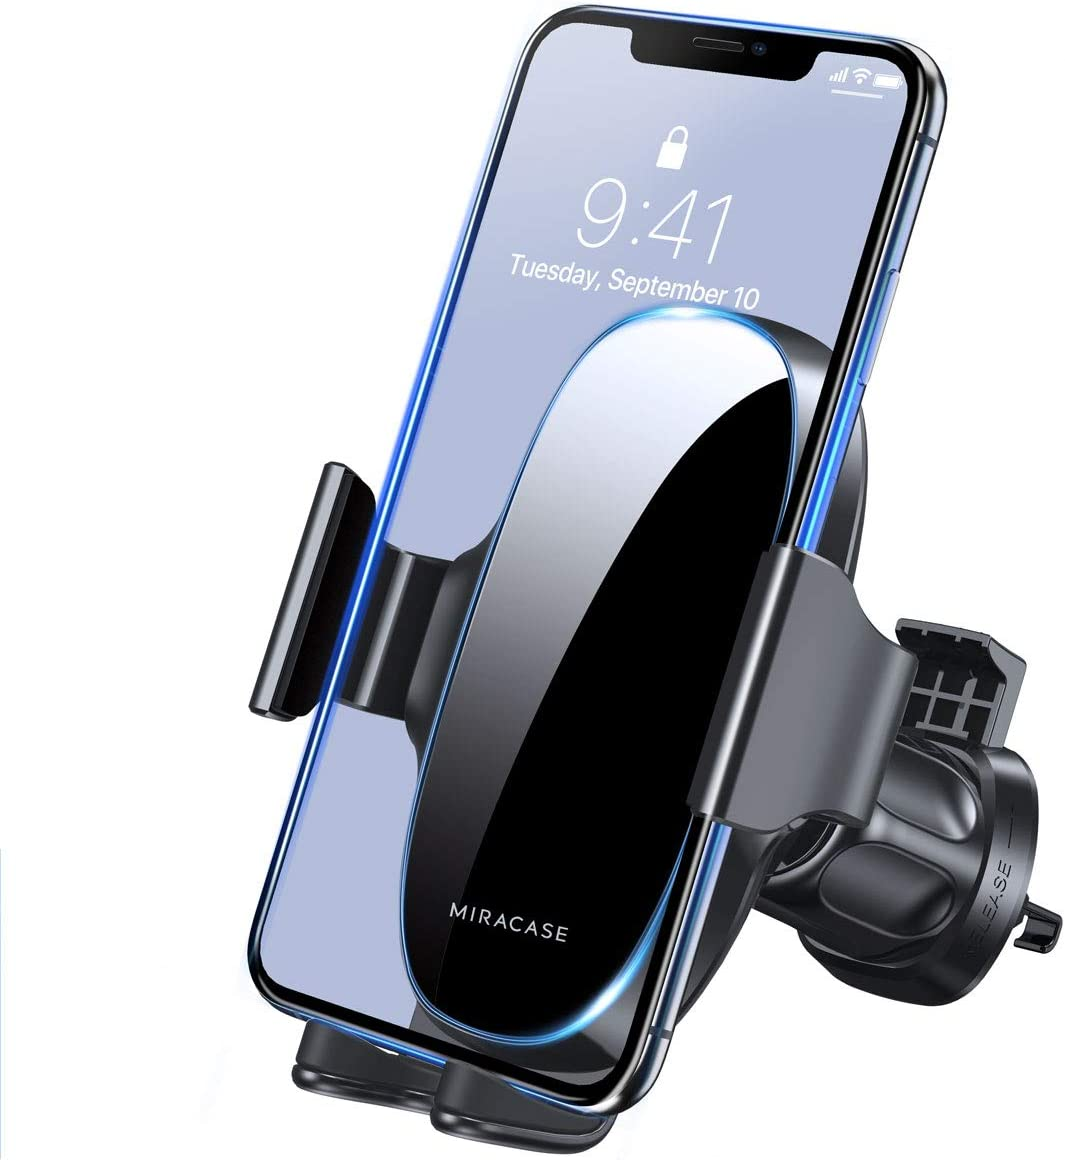 Upgraded-2Nd Generation Universal Phone Holder for Car, Air Vent Car Mount Compatible with Iphone 14 Series/14 Pro Max/13 Series/12 Series/11 and All Phones, Black